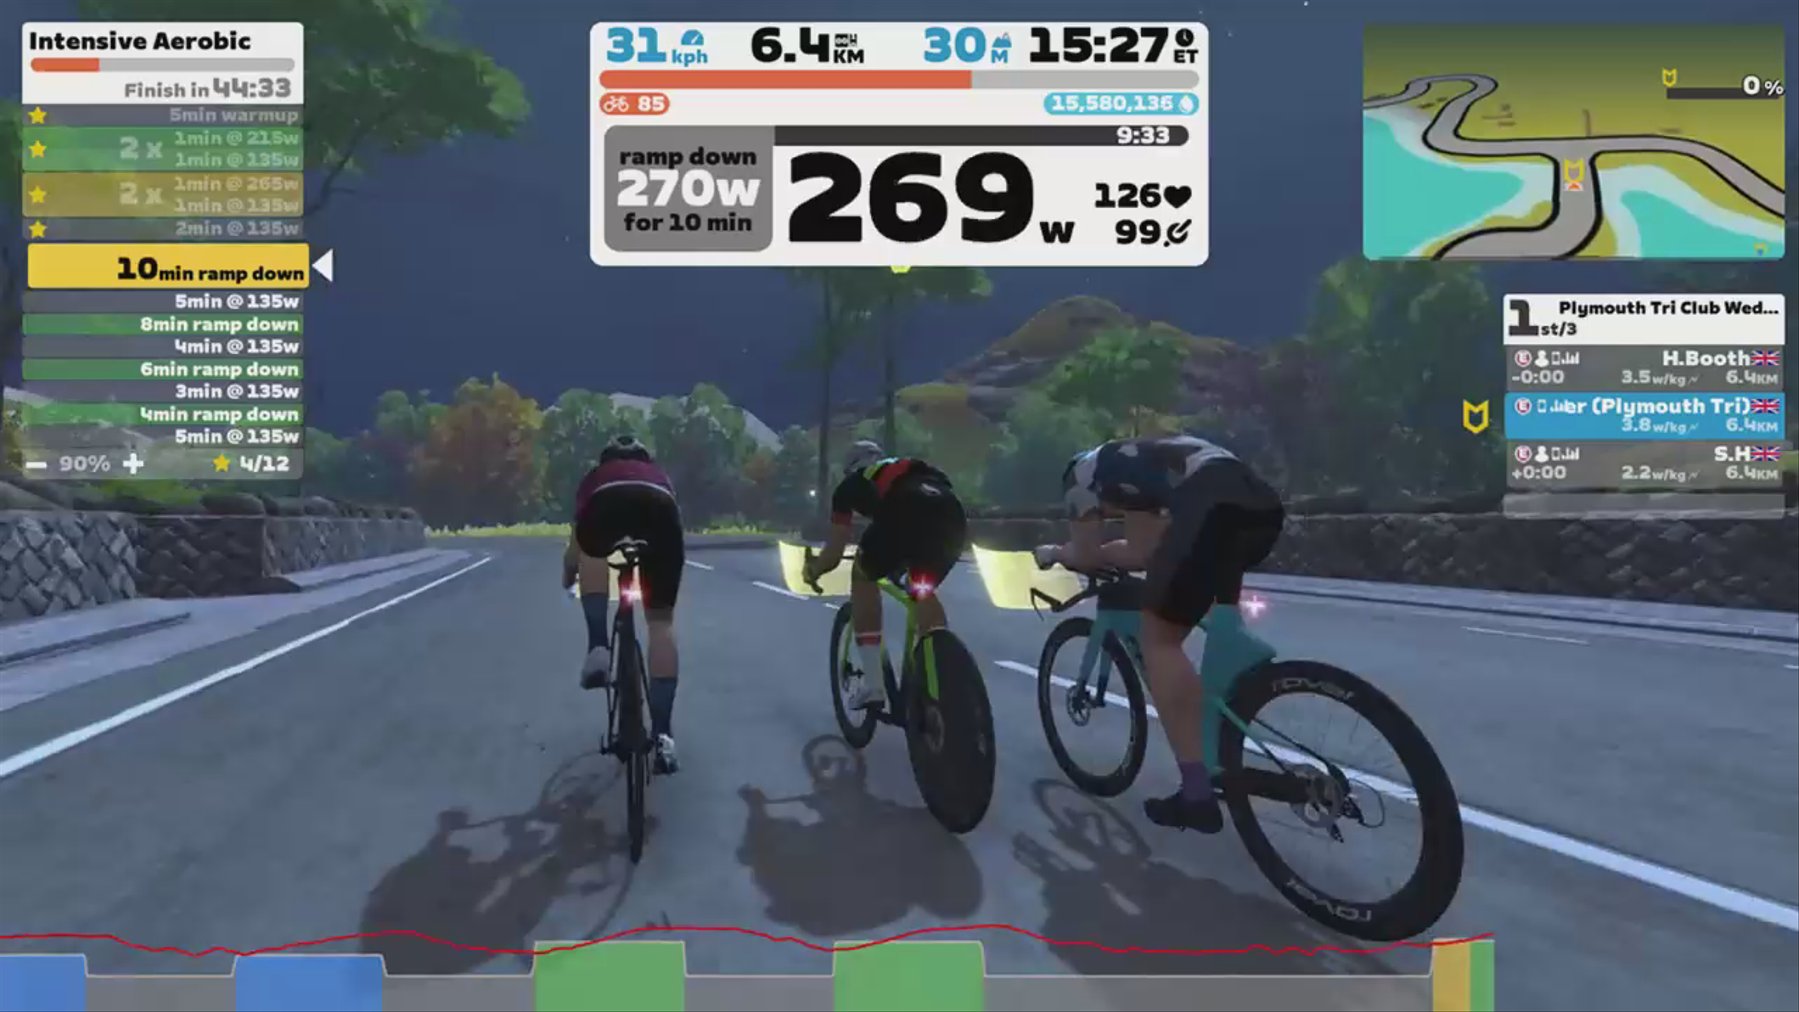 Zwift - Group Workout: Plymouth Tri Club Wednesday Workout Intensive Aerobic on Rolling Highlands in Scotland